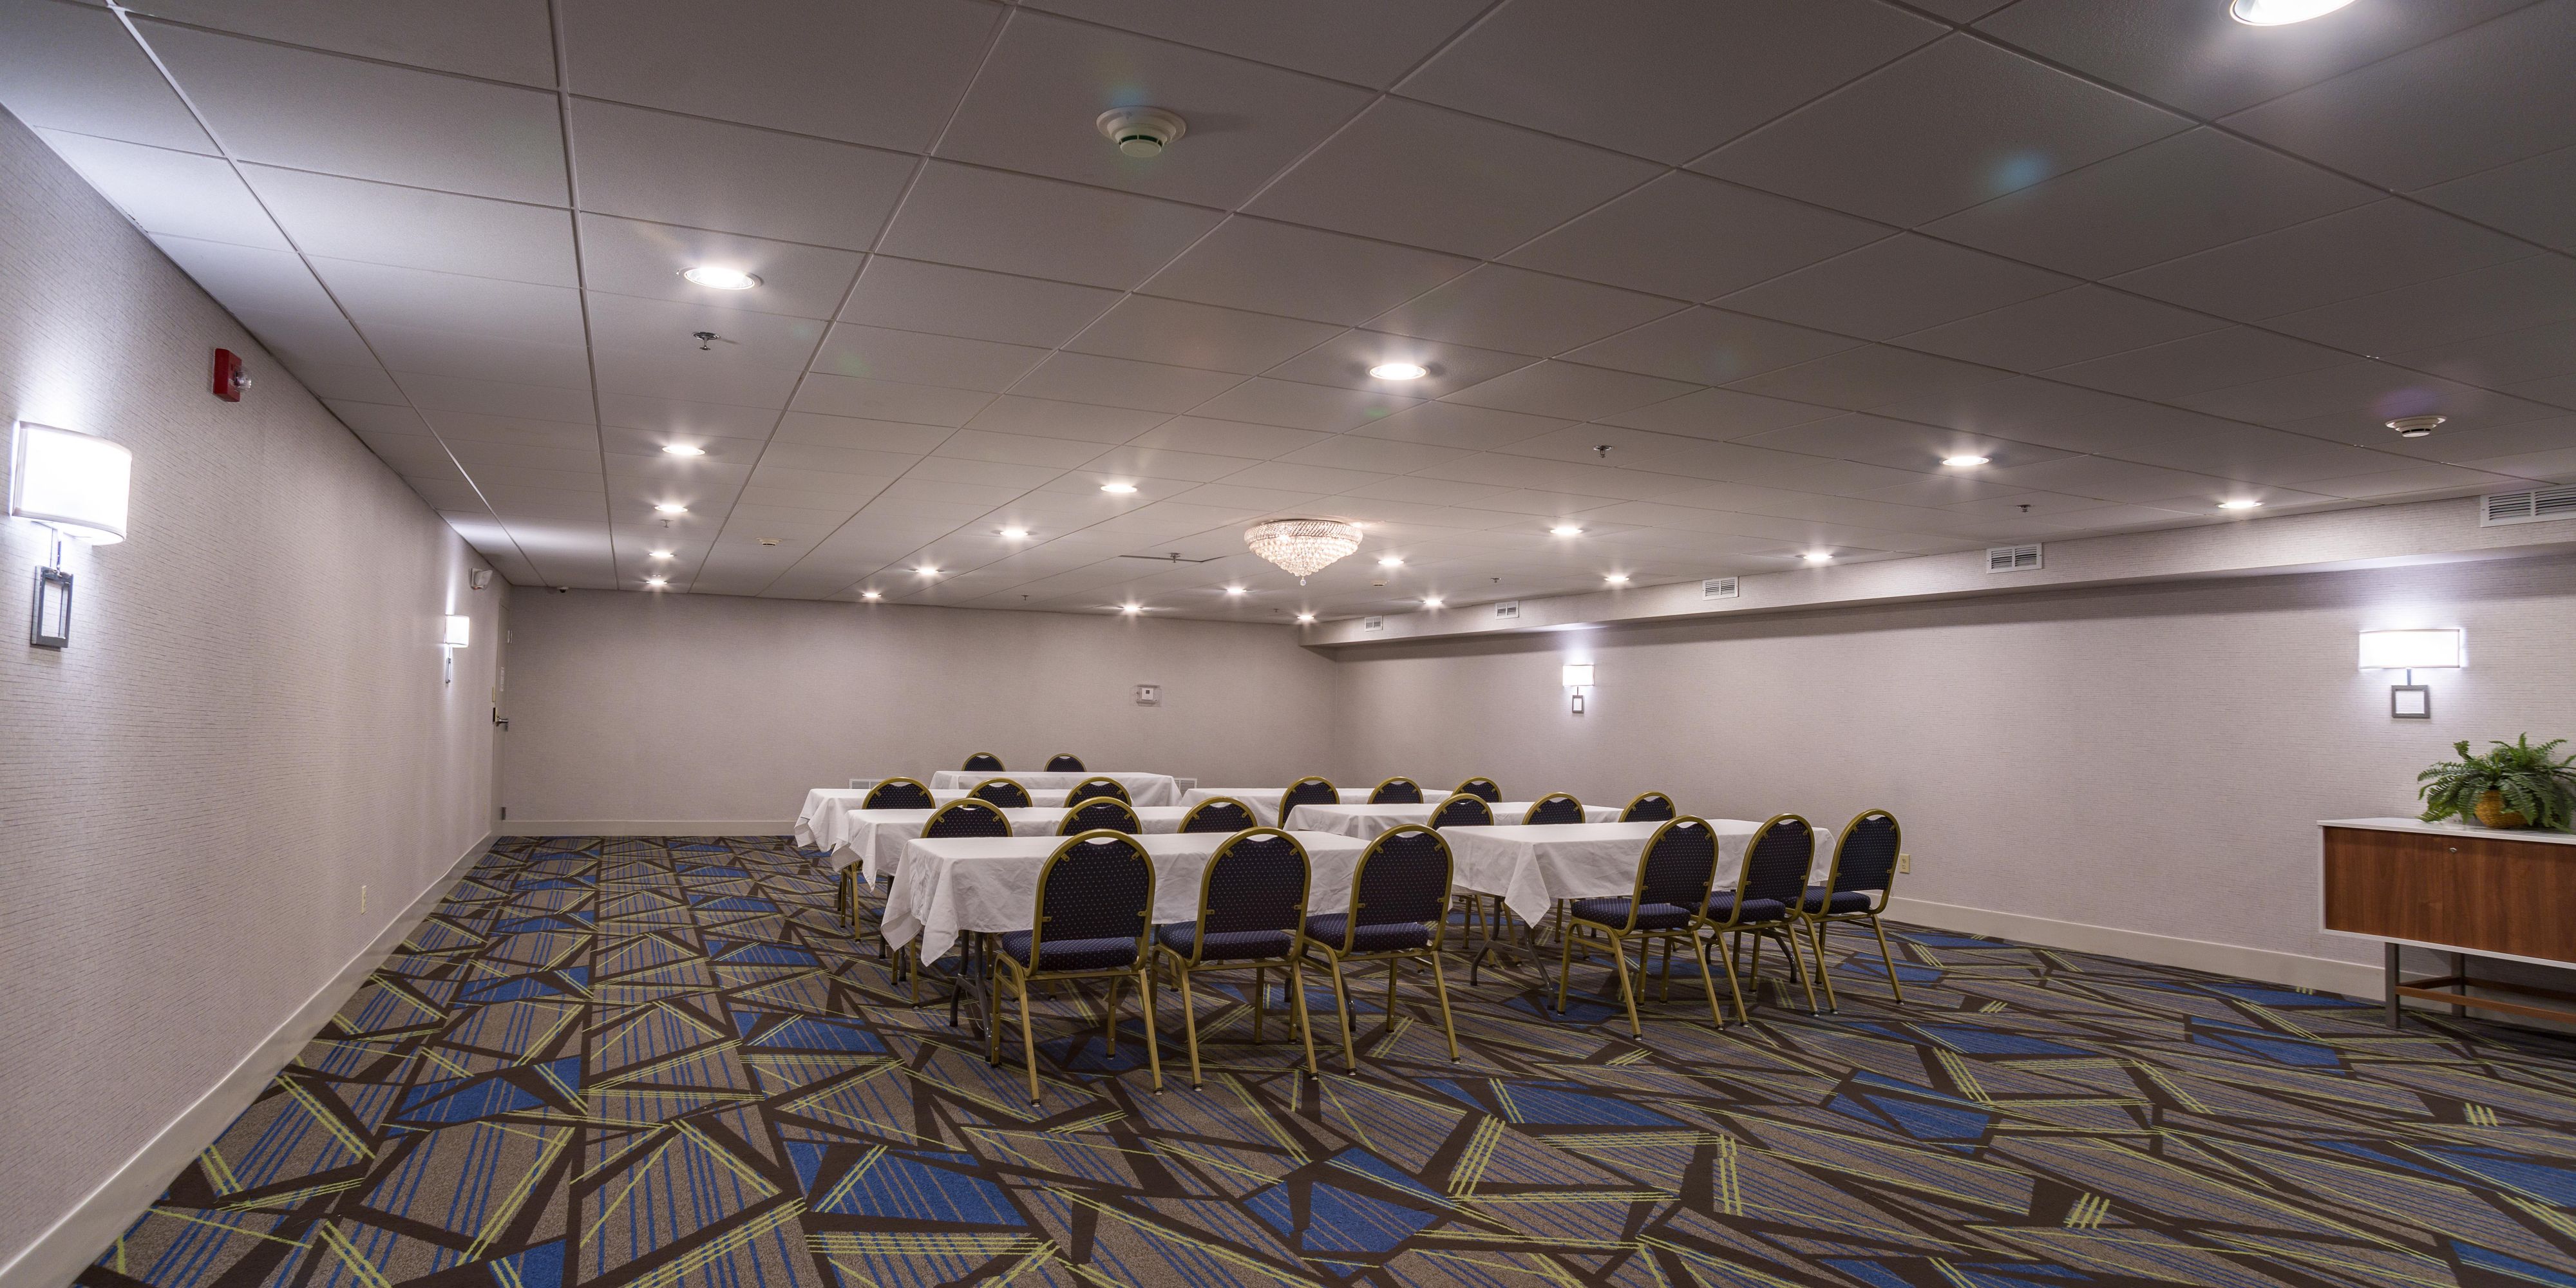 Our flexible meeting room is great for your small boardroom-style event or for a social affair for up to 50 people seated. Included in your meeting room rental we provide Wi-Fi, tables, chairs, and linens. The Thimble Room also offers a separate entrance for your guests. Please contact the sales department at 203-200-7117. 